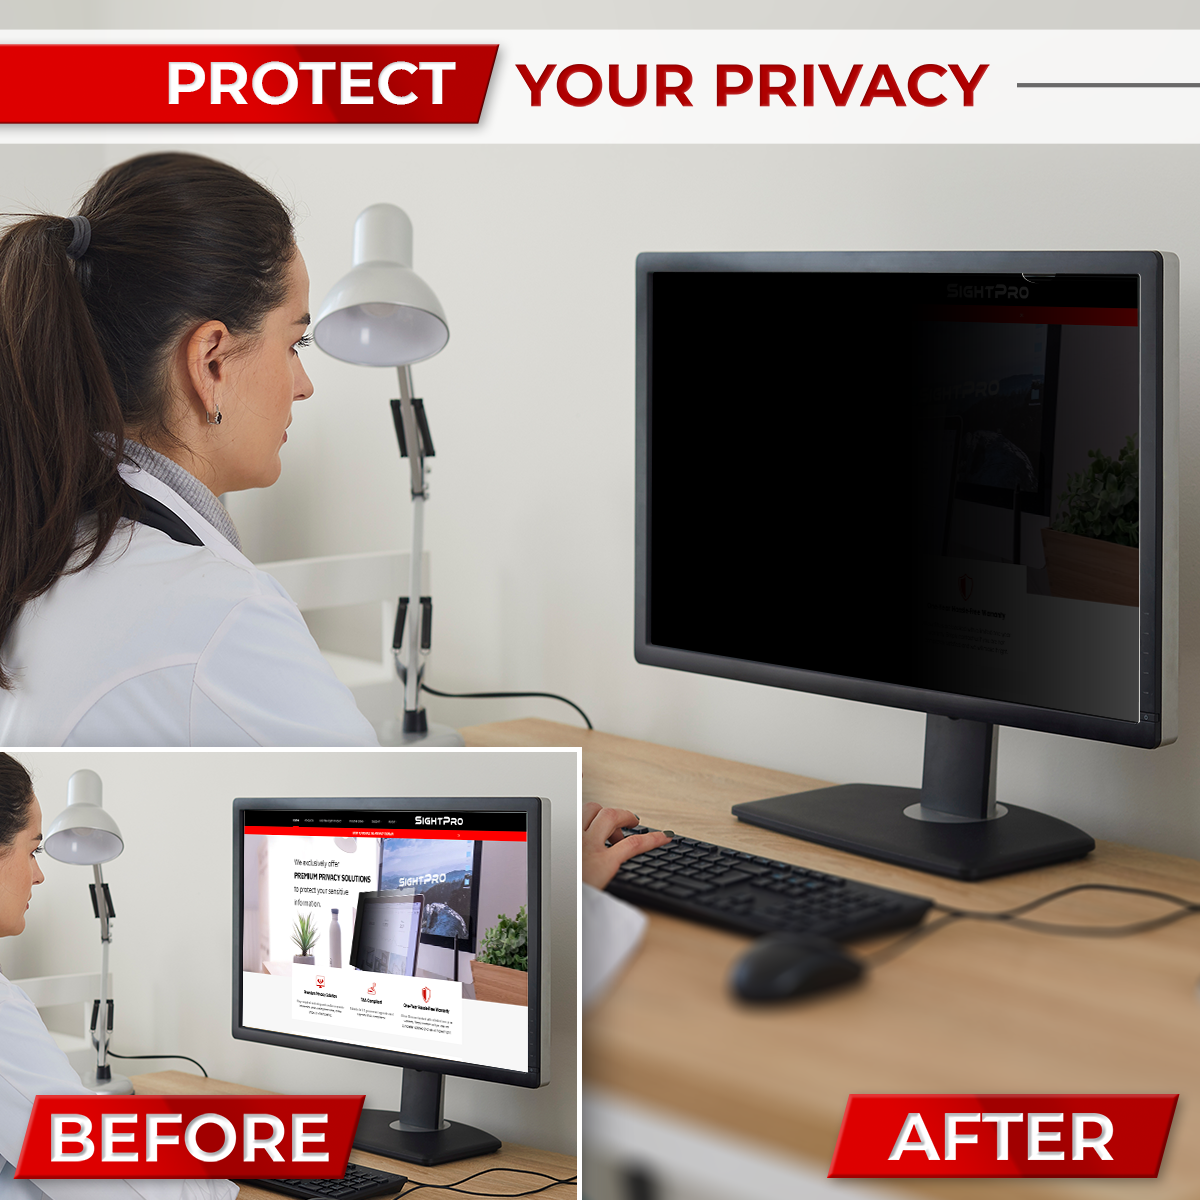 SightPro 23.8 Inch 16:9 Privacy Screen Filter for Computer Monitors